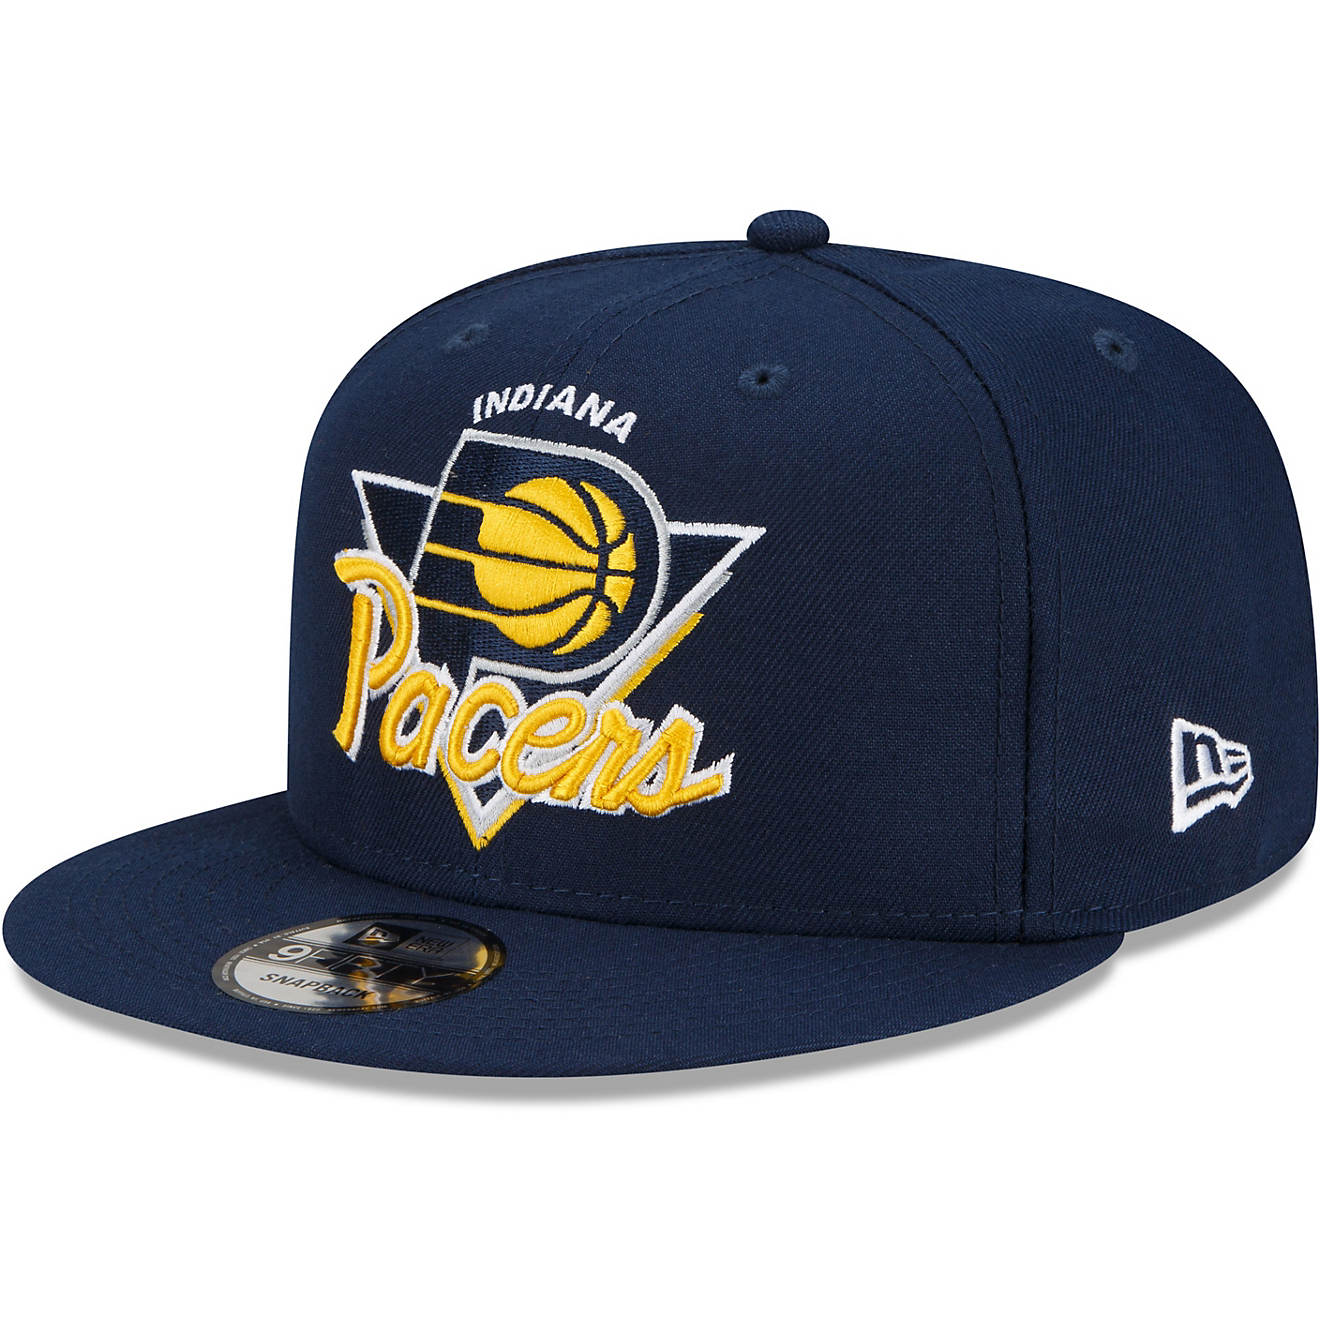 New Era Men's Indiana Pacers '21 Tip Off 9FIFTY Cap                                                                              - view number 1